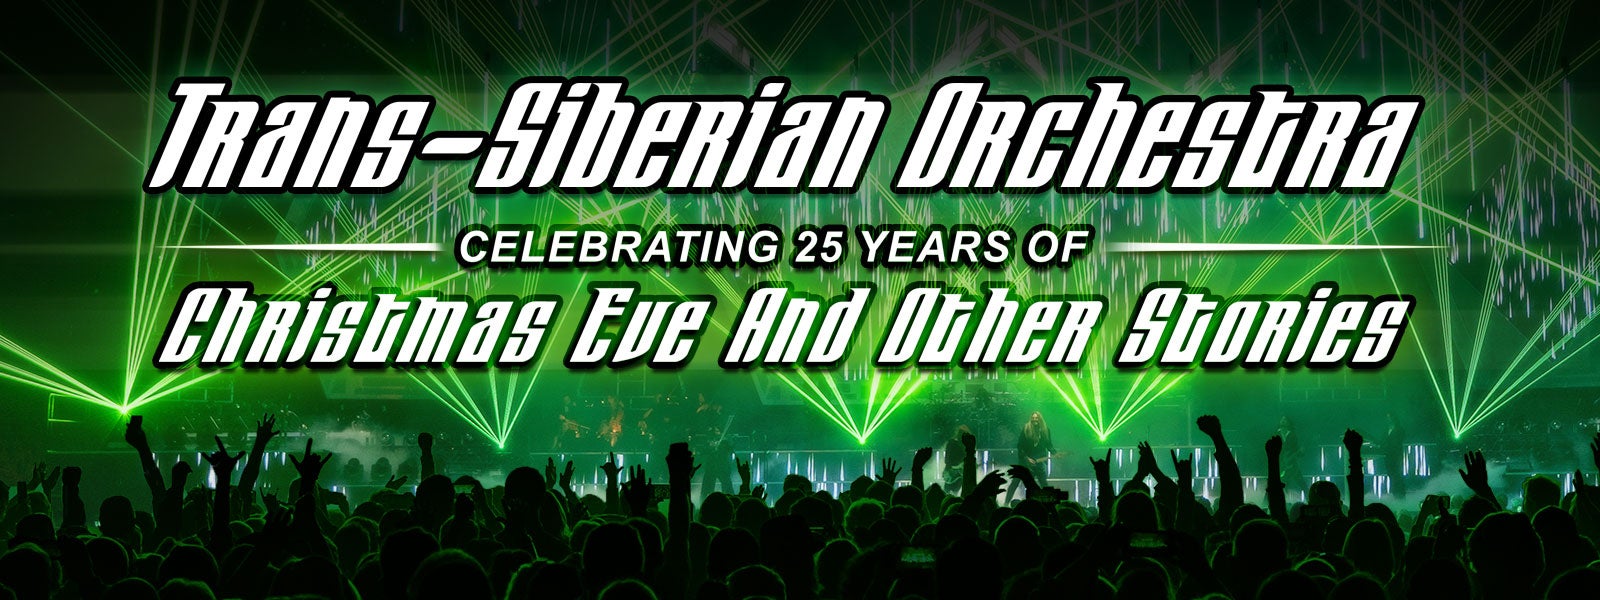 Trans-Siberian Orchestra: Christmas Eve & Other Stories